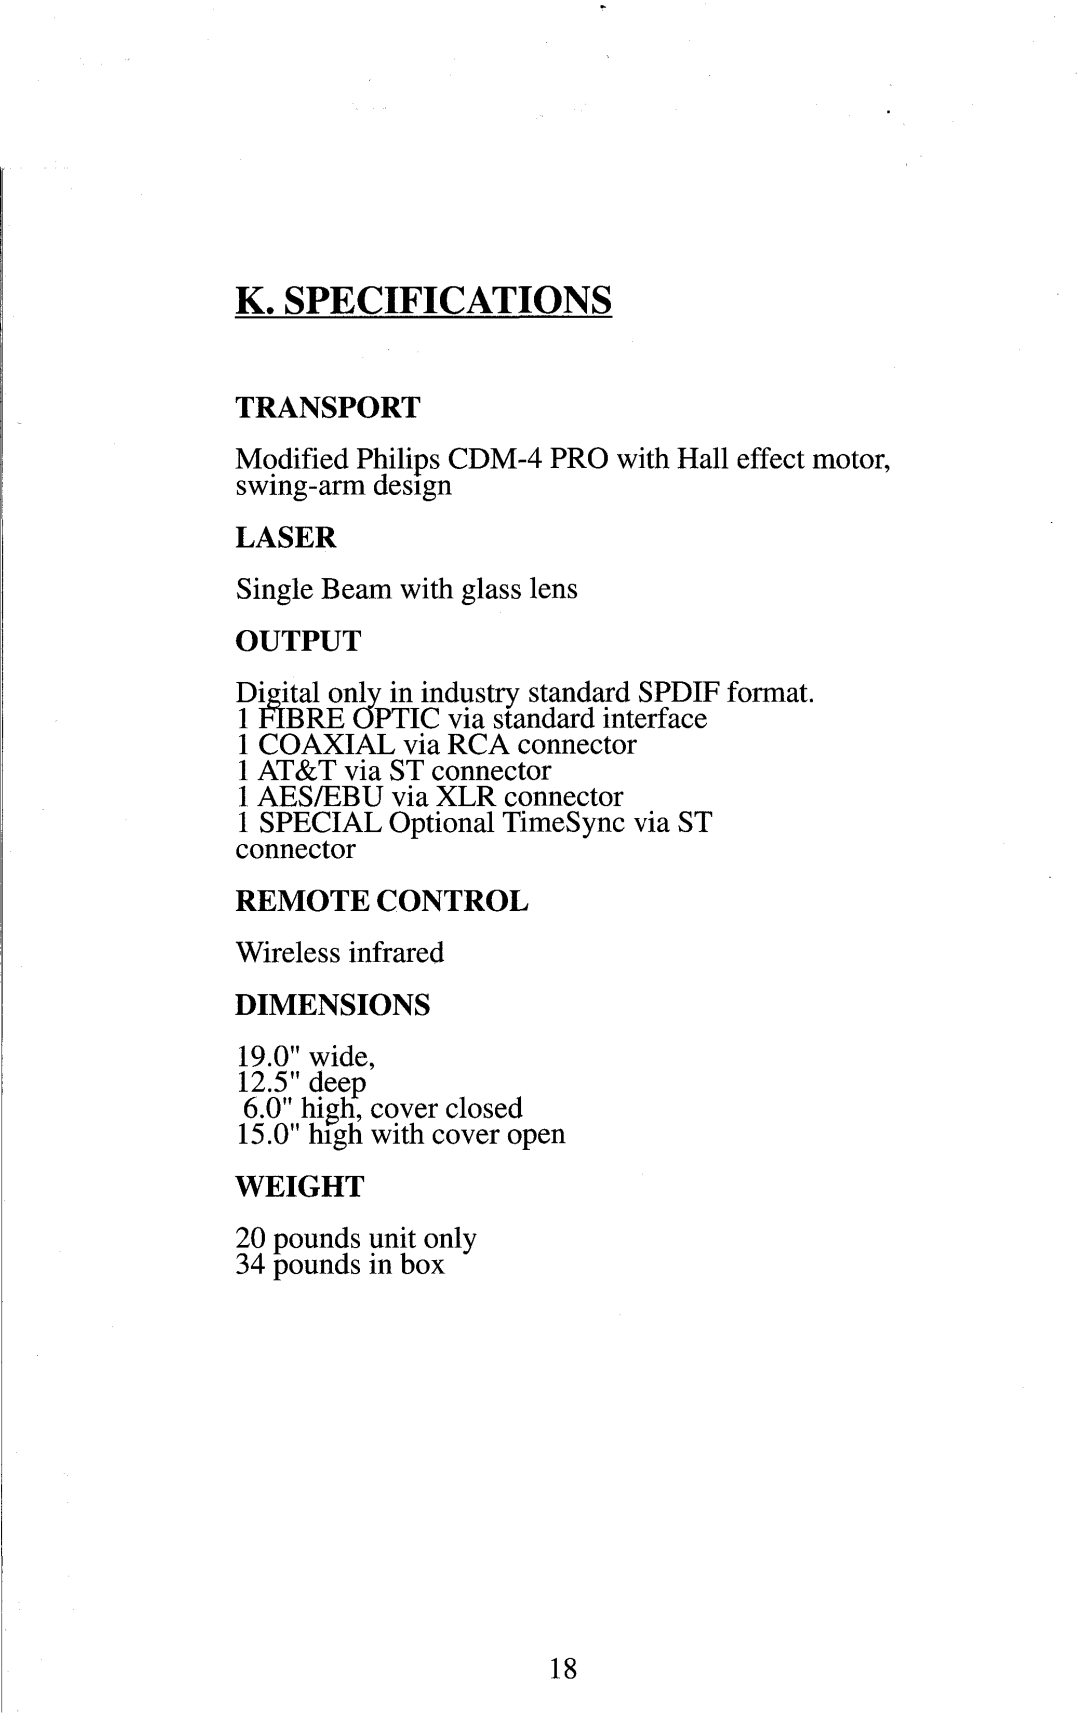 Krell Industries MD10 manual Specifications 